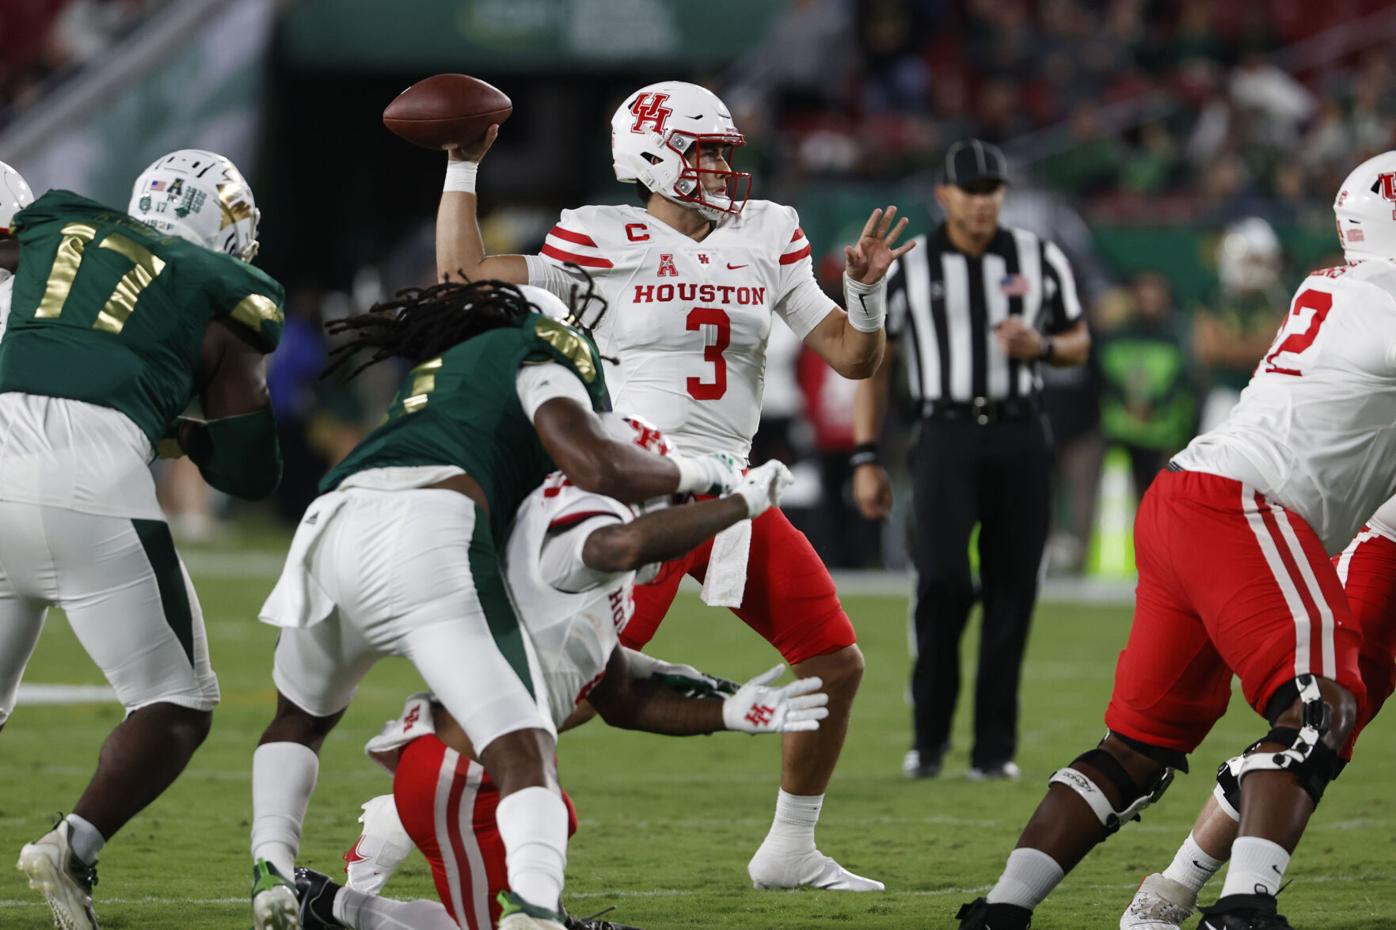 Tune passes for 385 yards, No. 20 Houston tops USF 54-42